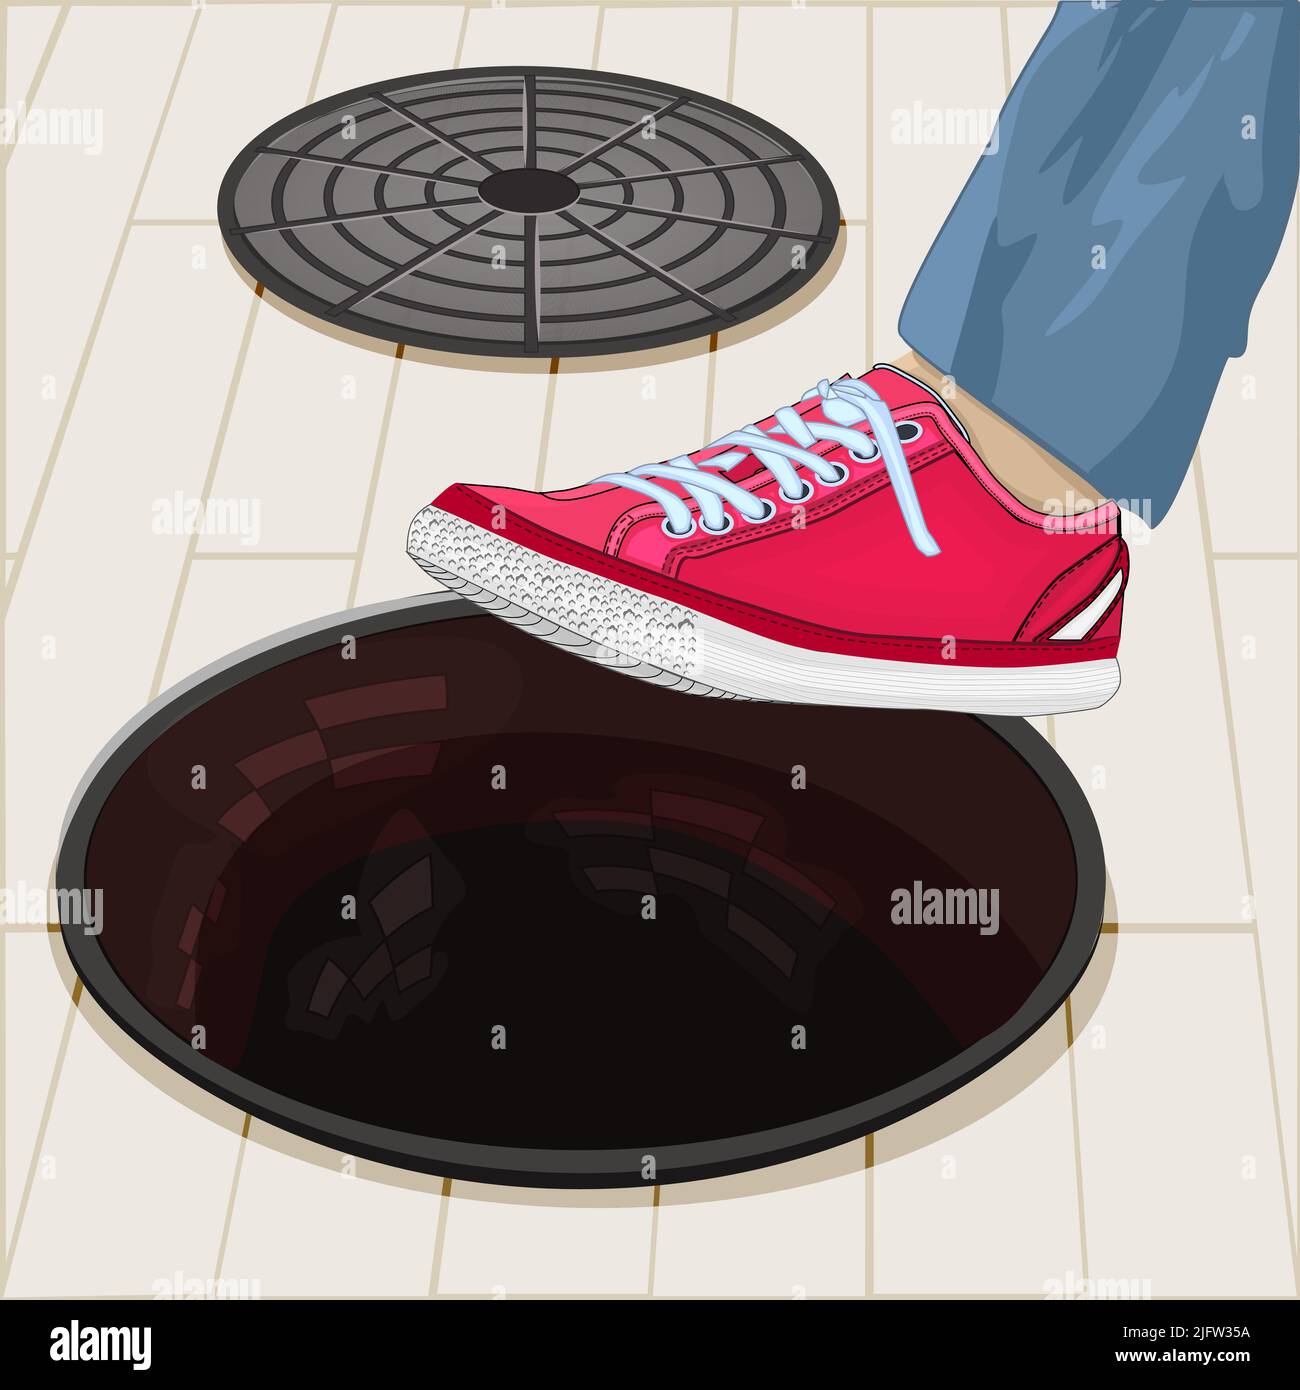 Human leg on open manhole.Man step in sewer hole.Risks, accident, pedestrian safety and insurance concept.Careless men ignoring exposed manhole.Vector Stock Vector